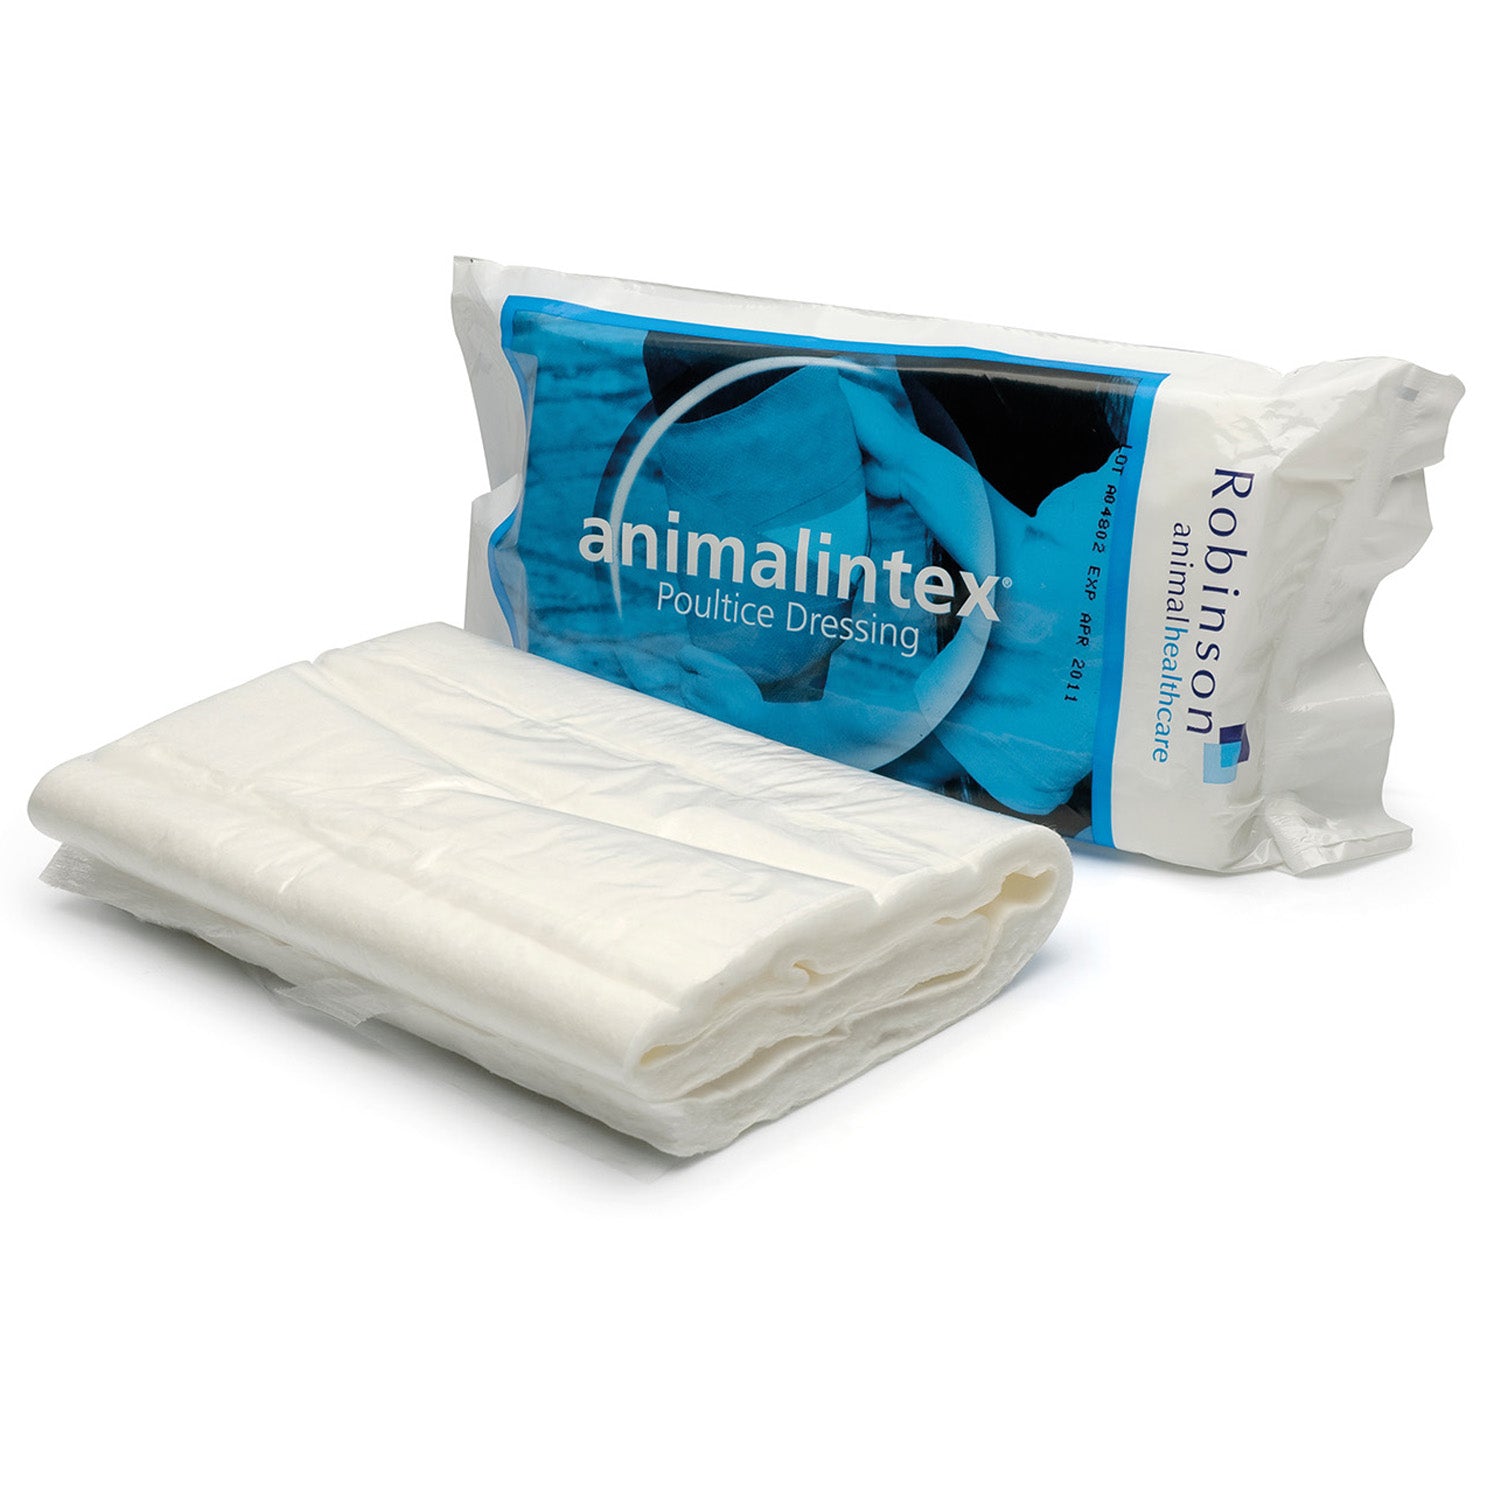 Robinsons Healthcare Animalintex Poultice Dressing- 10 Pack